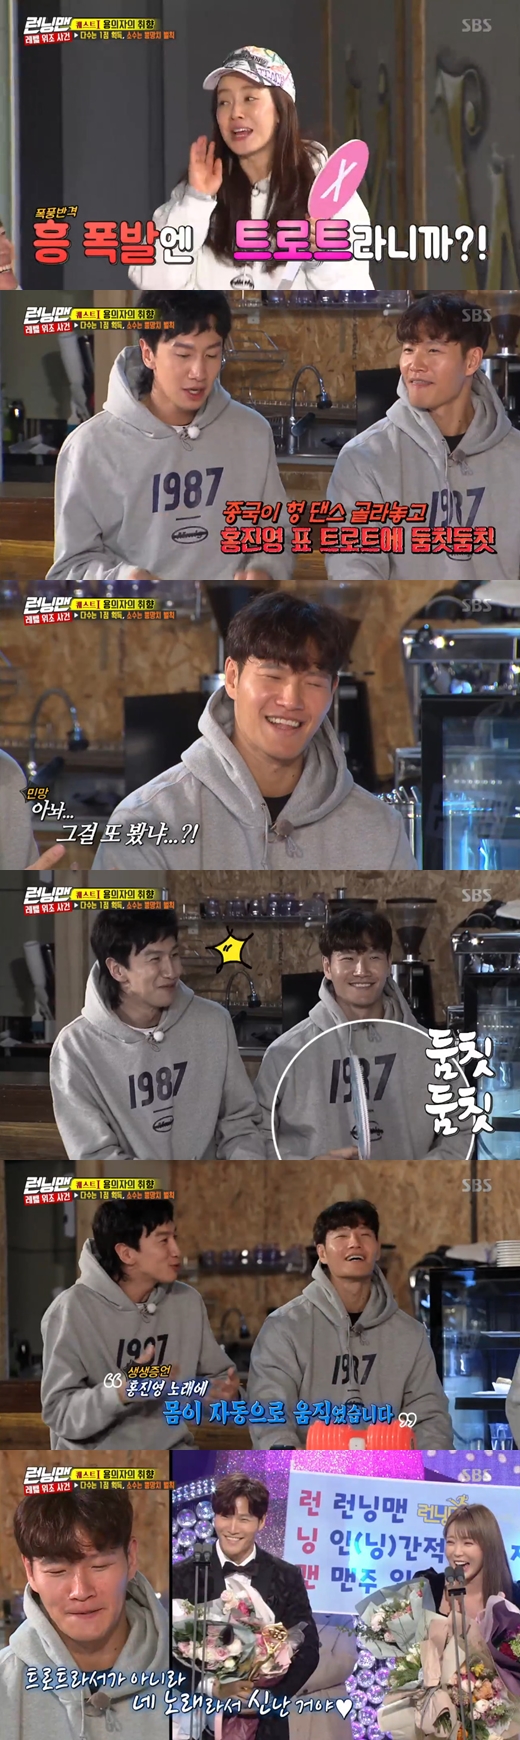 Singer Kim Jong-kook instinctively responded to Hong Jin-youngs song.Actor Ryu Seung-ryong, Lee Nae-nui, Jin Seon-gyu, Dong-hwi and Gong-myeong appeared as guests on SBS Running Man broadcast on the 20th.On the day of the broadcast, a game was held to Choice O and X on topics that were not easy to decide. The theme was Is trot good in singing room?Or is dance good?Kim Jong-kook danced Choices in response.However, when Song Ji-hyo started singing Hong Jin-youngs song Battery of Love, he showed a natural shake of his shoulders.Lee Kwang-soo, who saw this, laughed at the love line of the two, saying, Kim Jong-kook danced without knowing it because Hong Jin-young song came out.